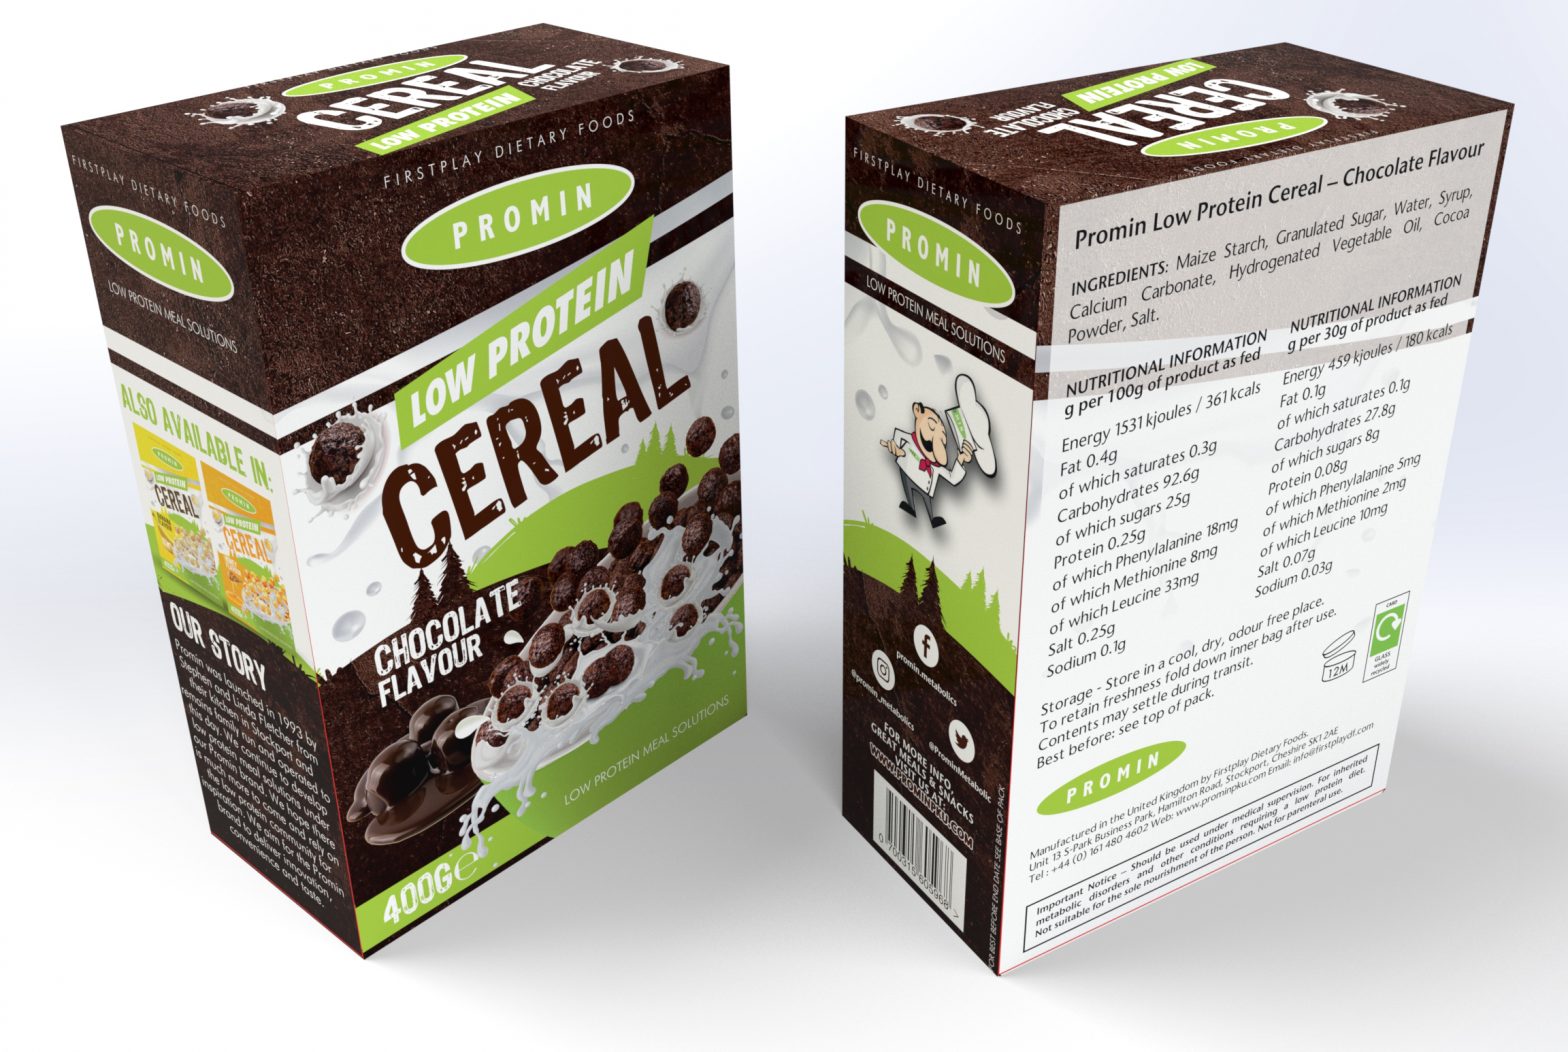 Promin Low Protein Cereal Chocolate